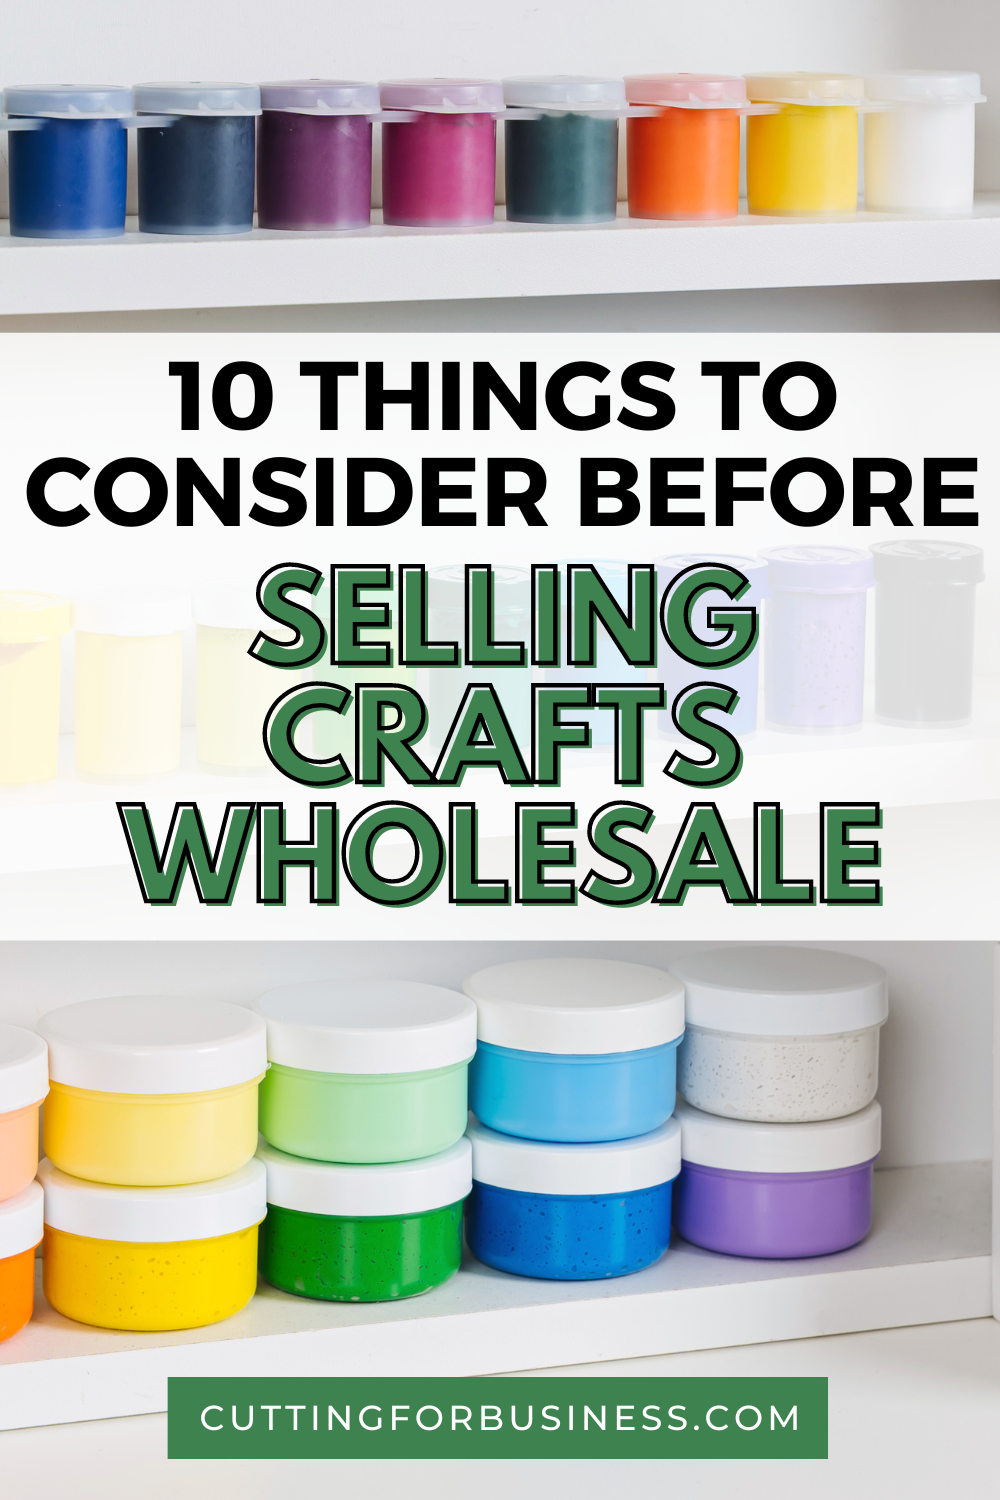 10 Things to Consider Before Selling Crafts Wholesale - cuttingforbusiness.com.